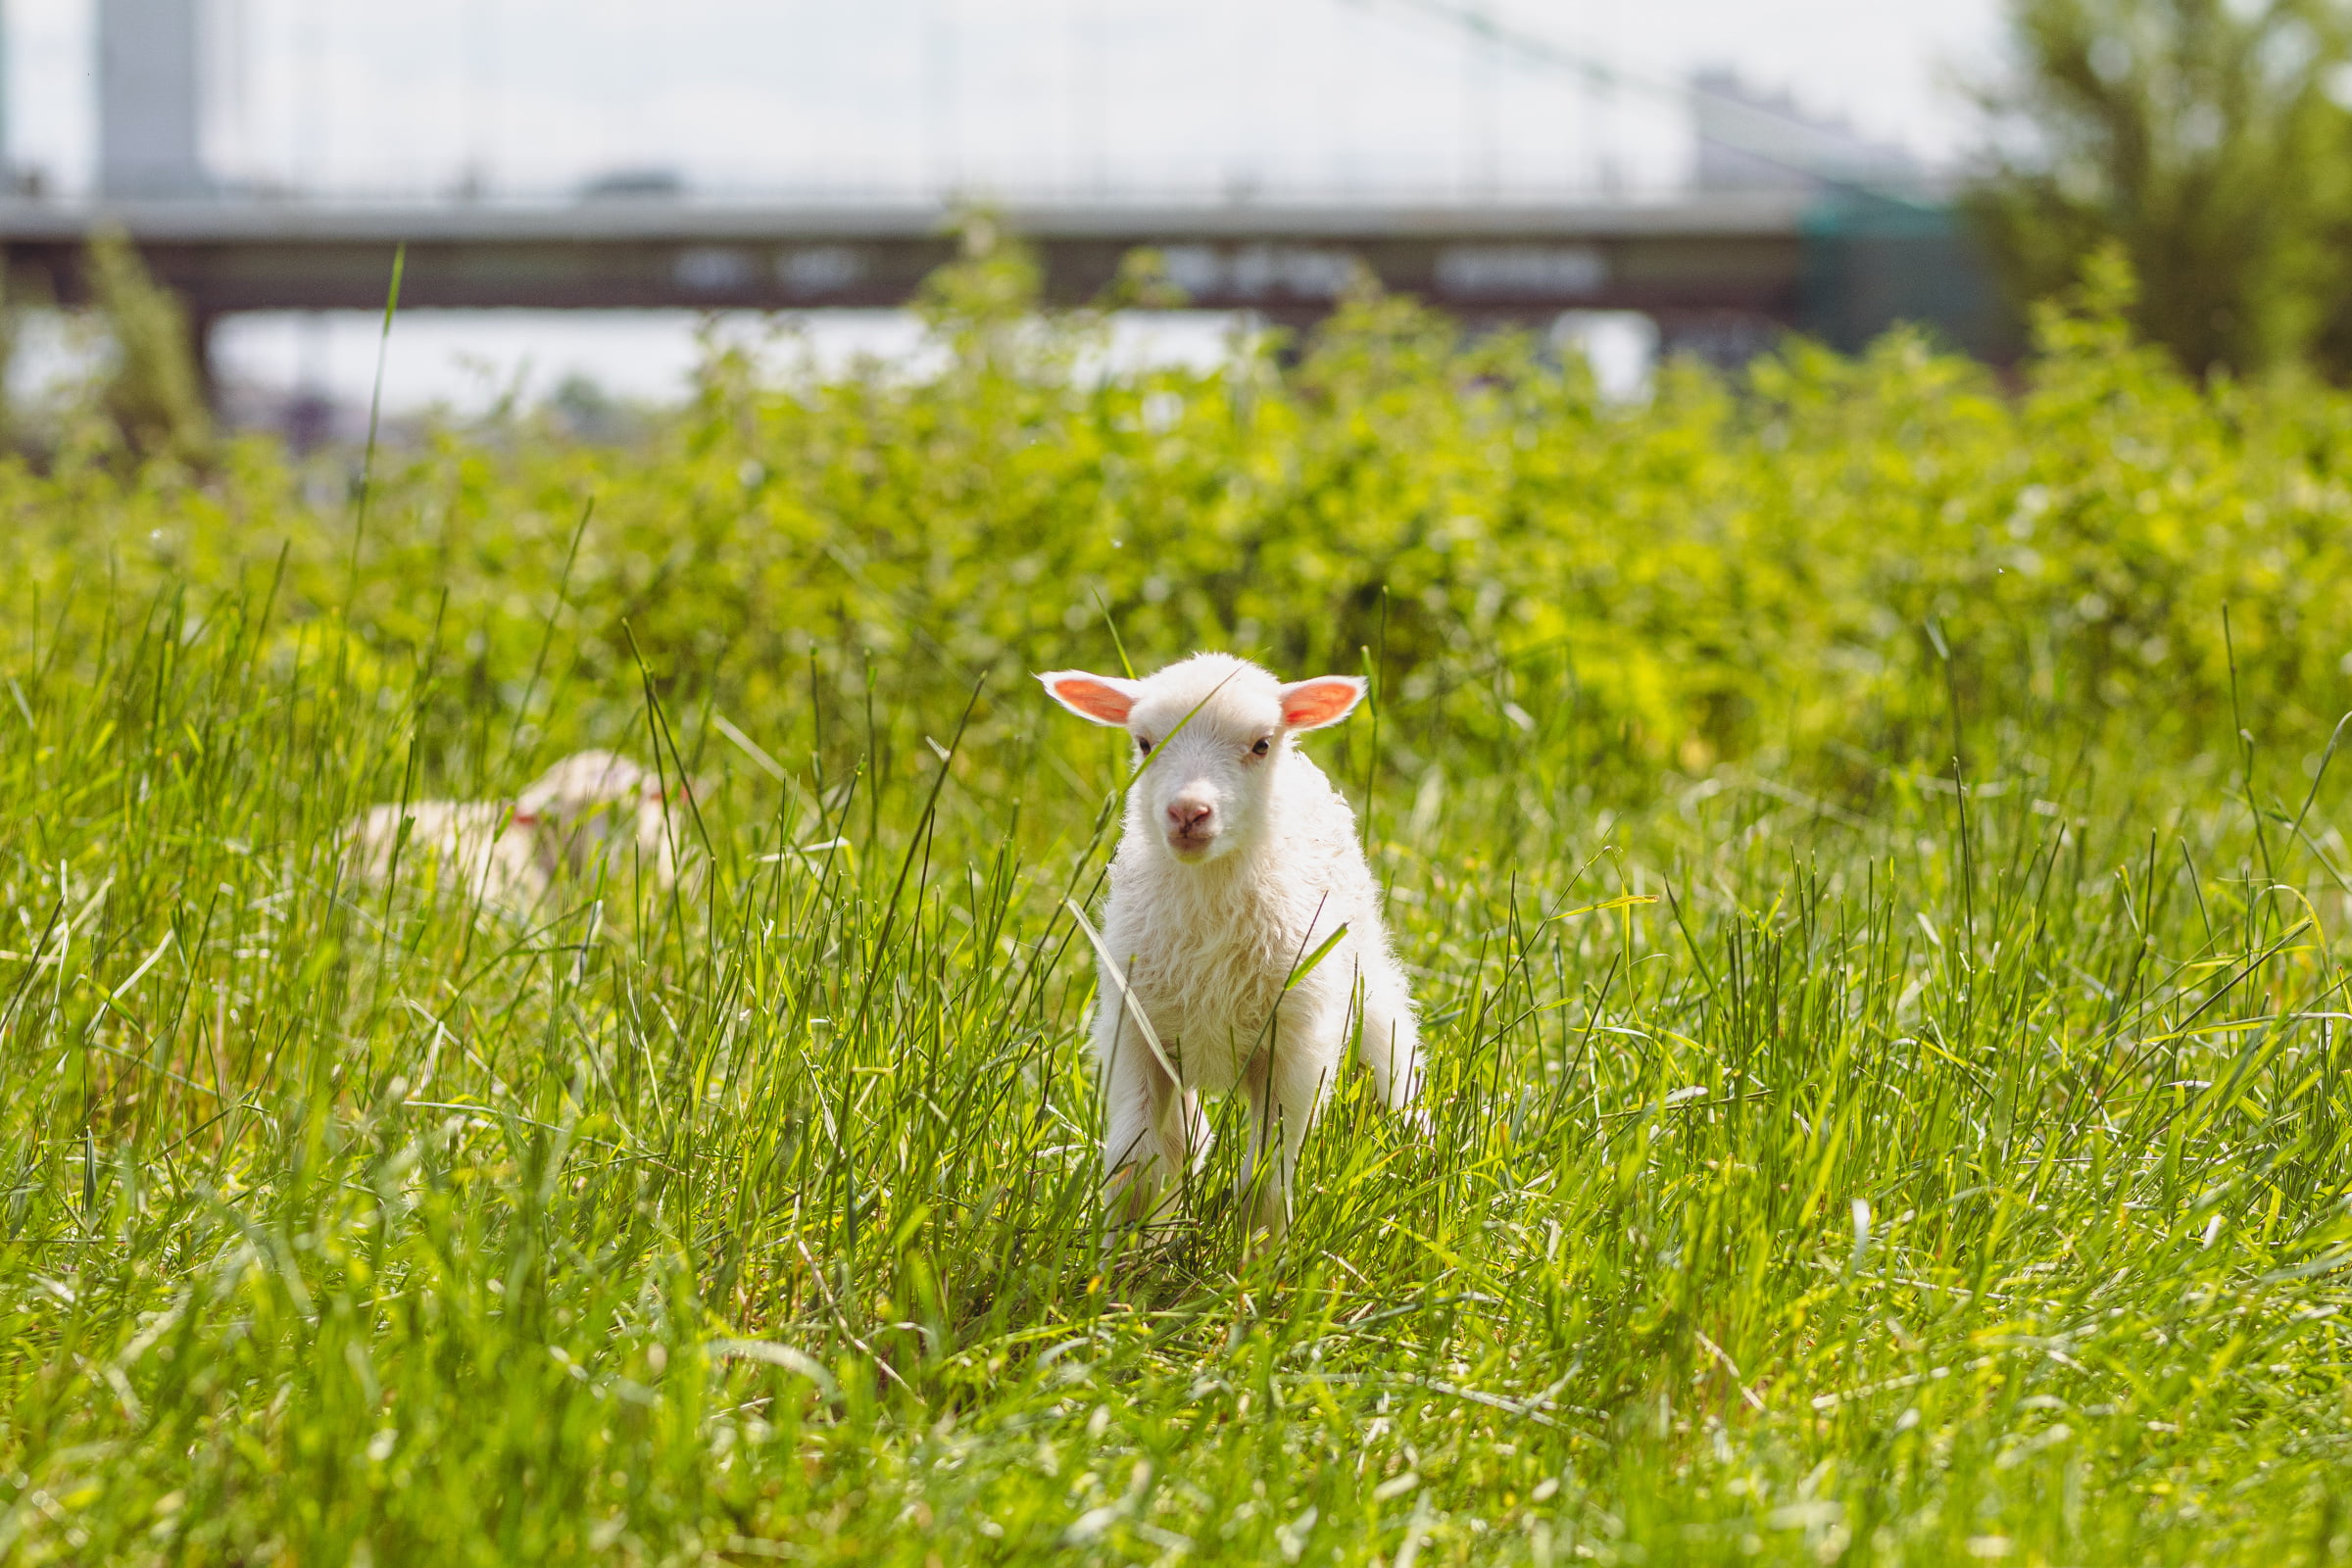 A young sheep standing in tall grass, looking attentively at the camera.